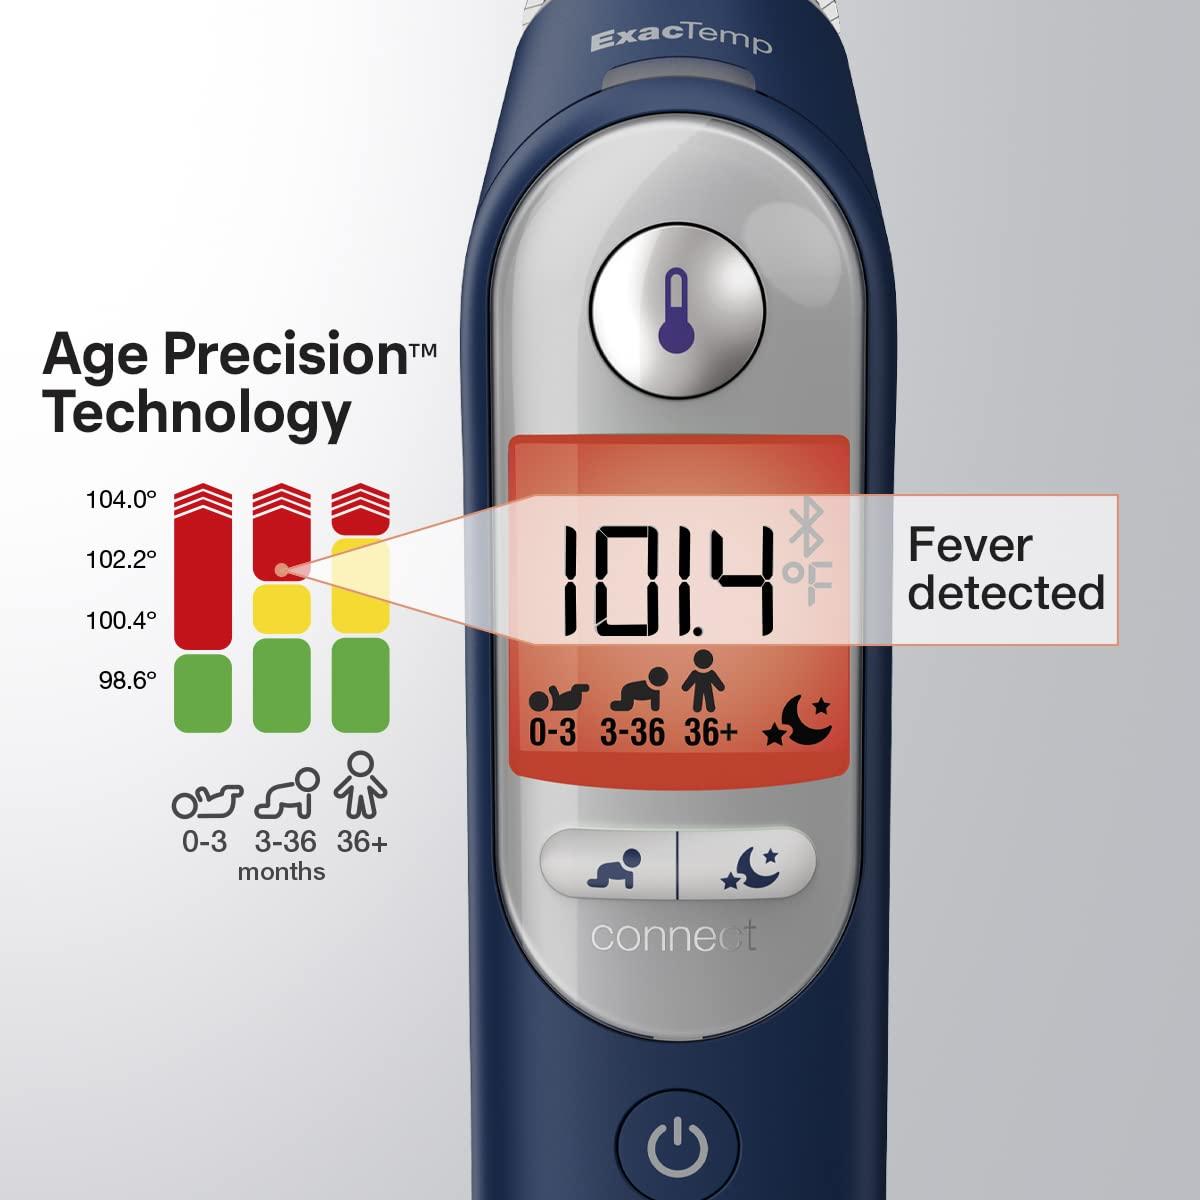 Ear Thermometer - Braun - Thermoscan 7 with Age Precision